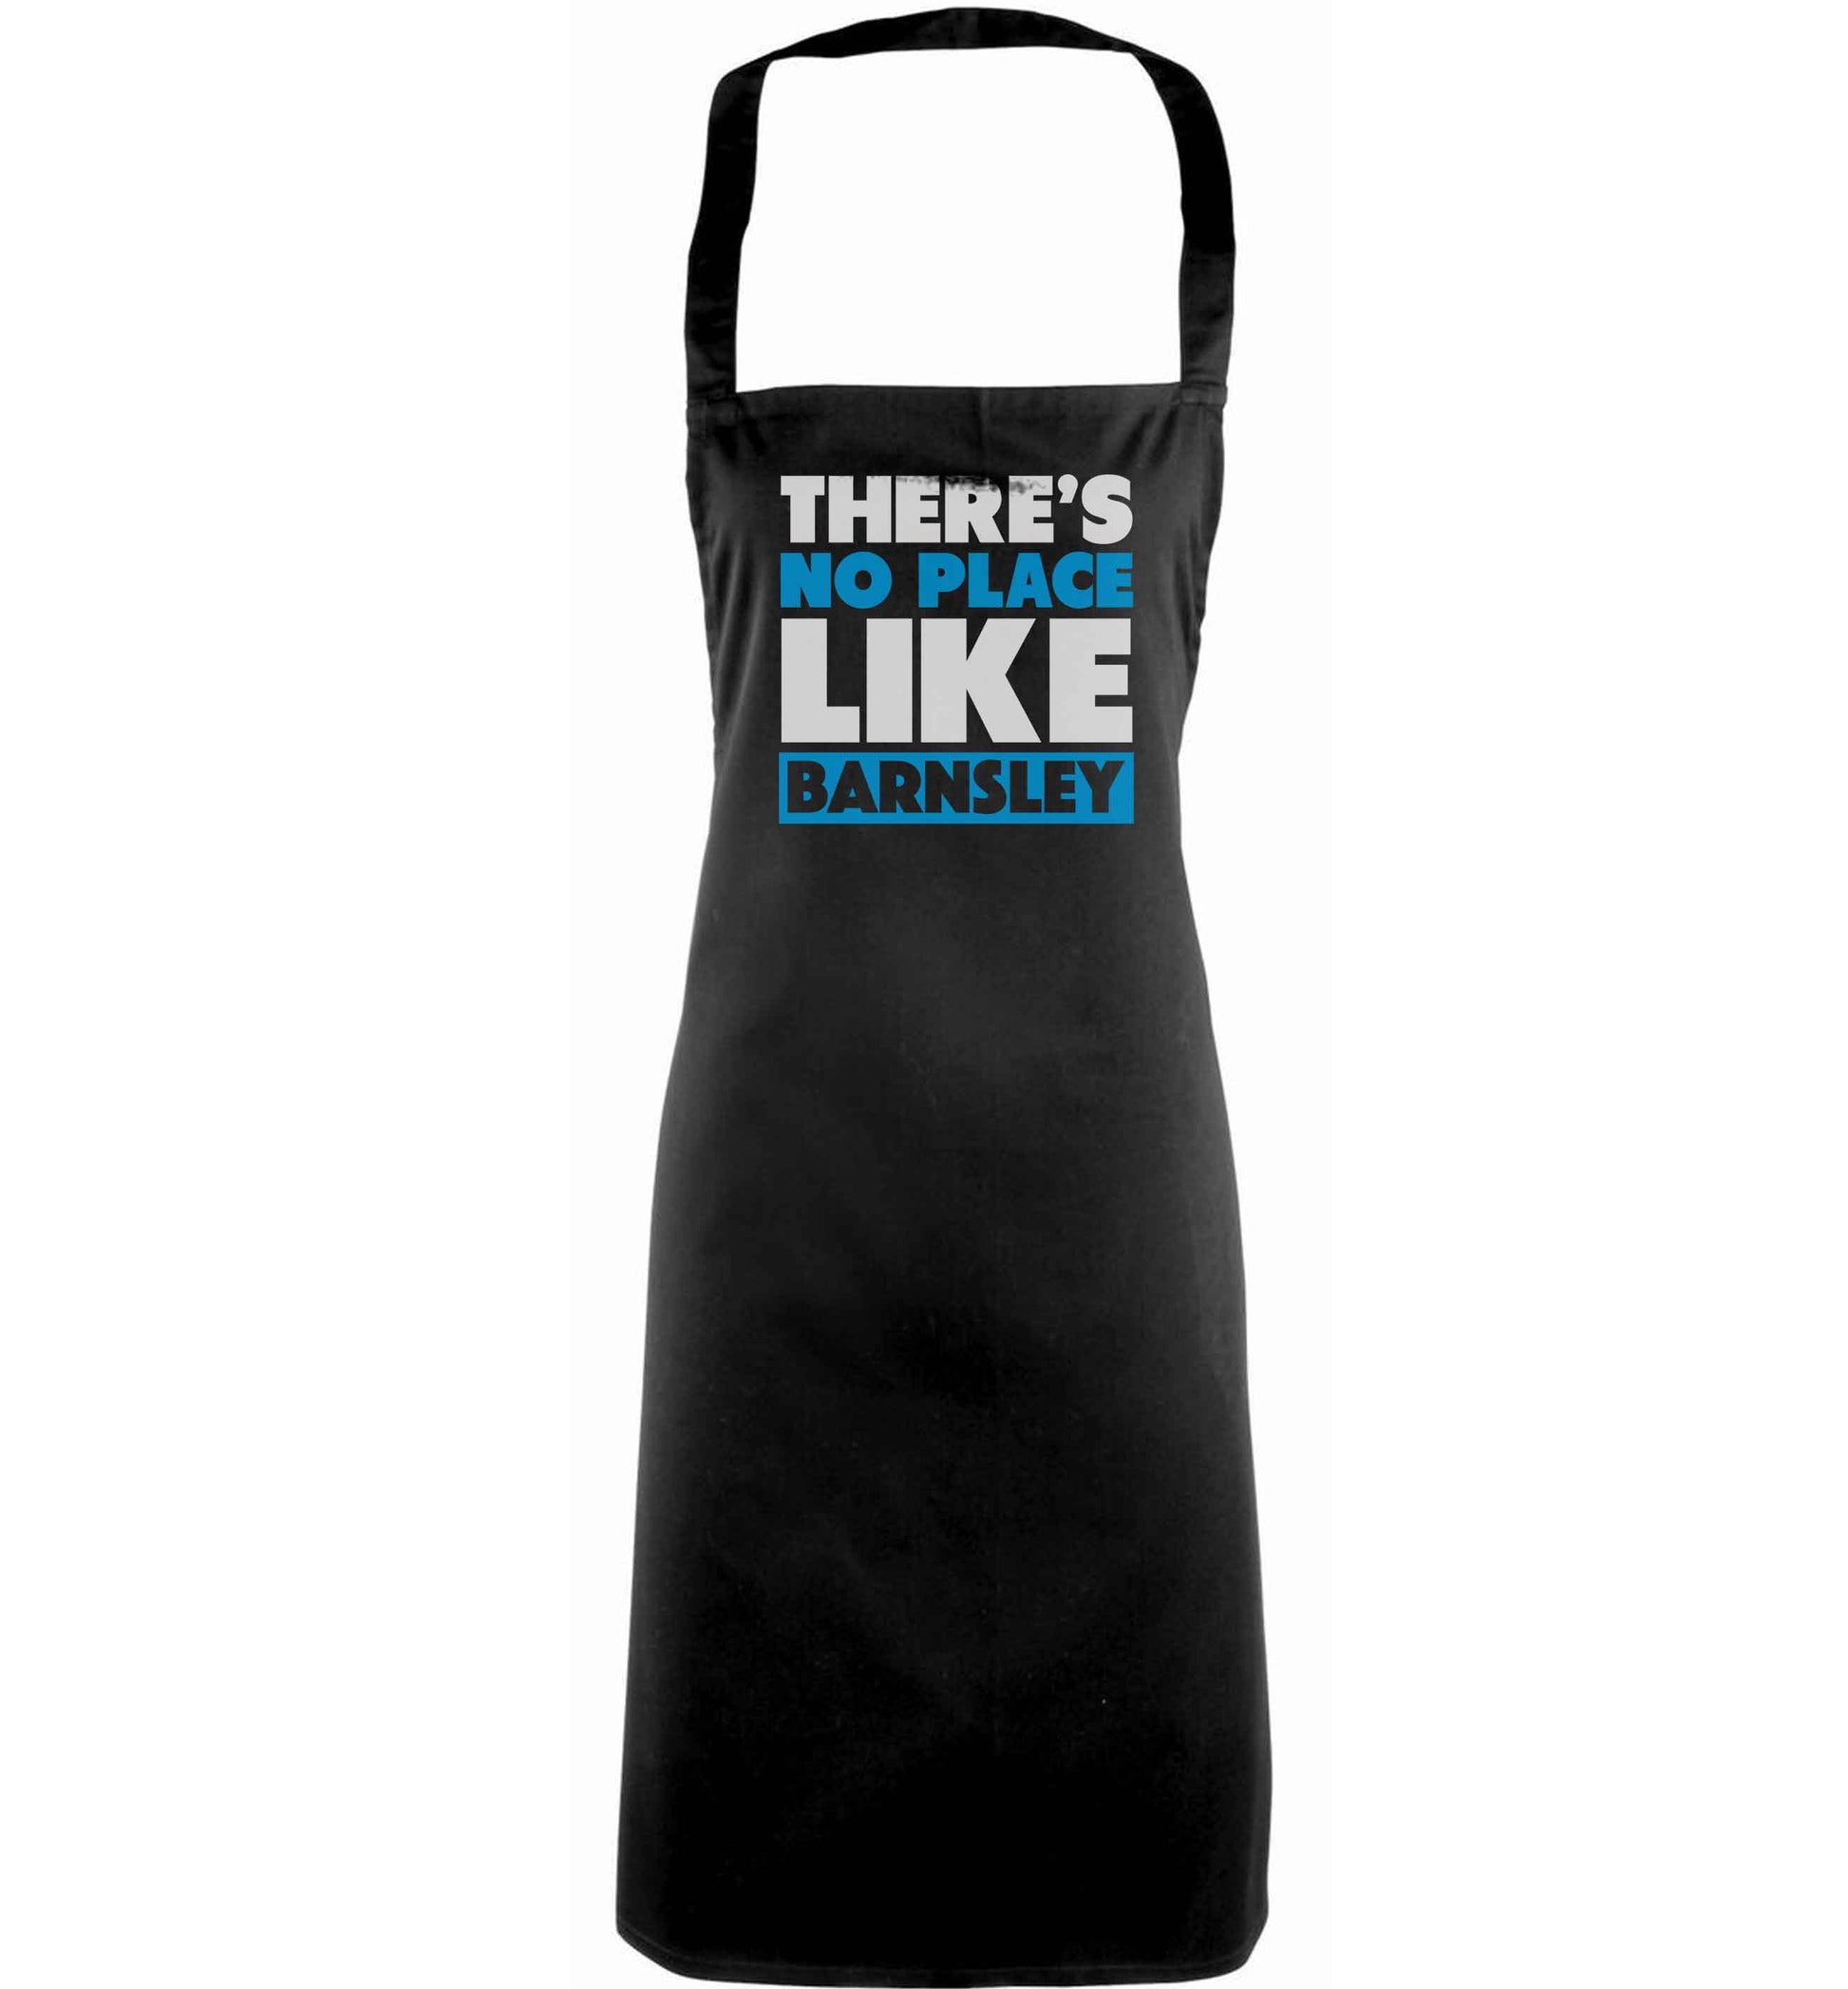 There's No Place Like Barnsley adults black apron